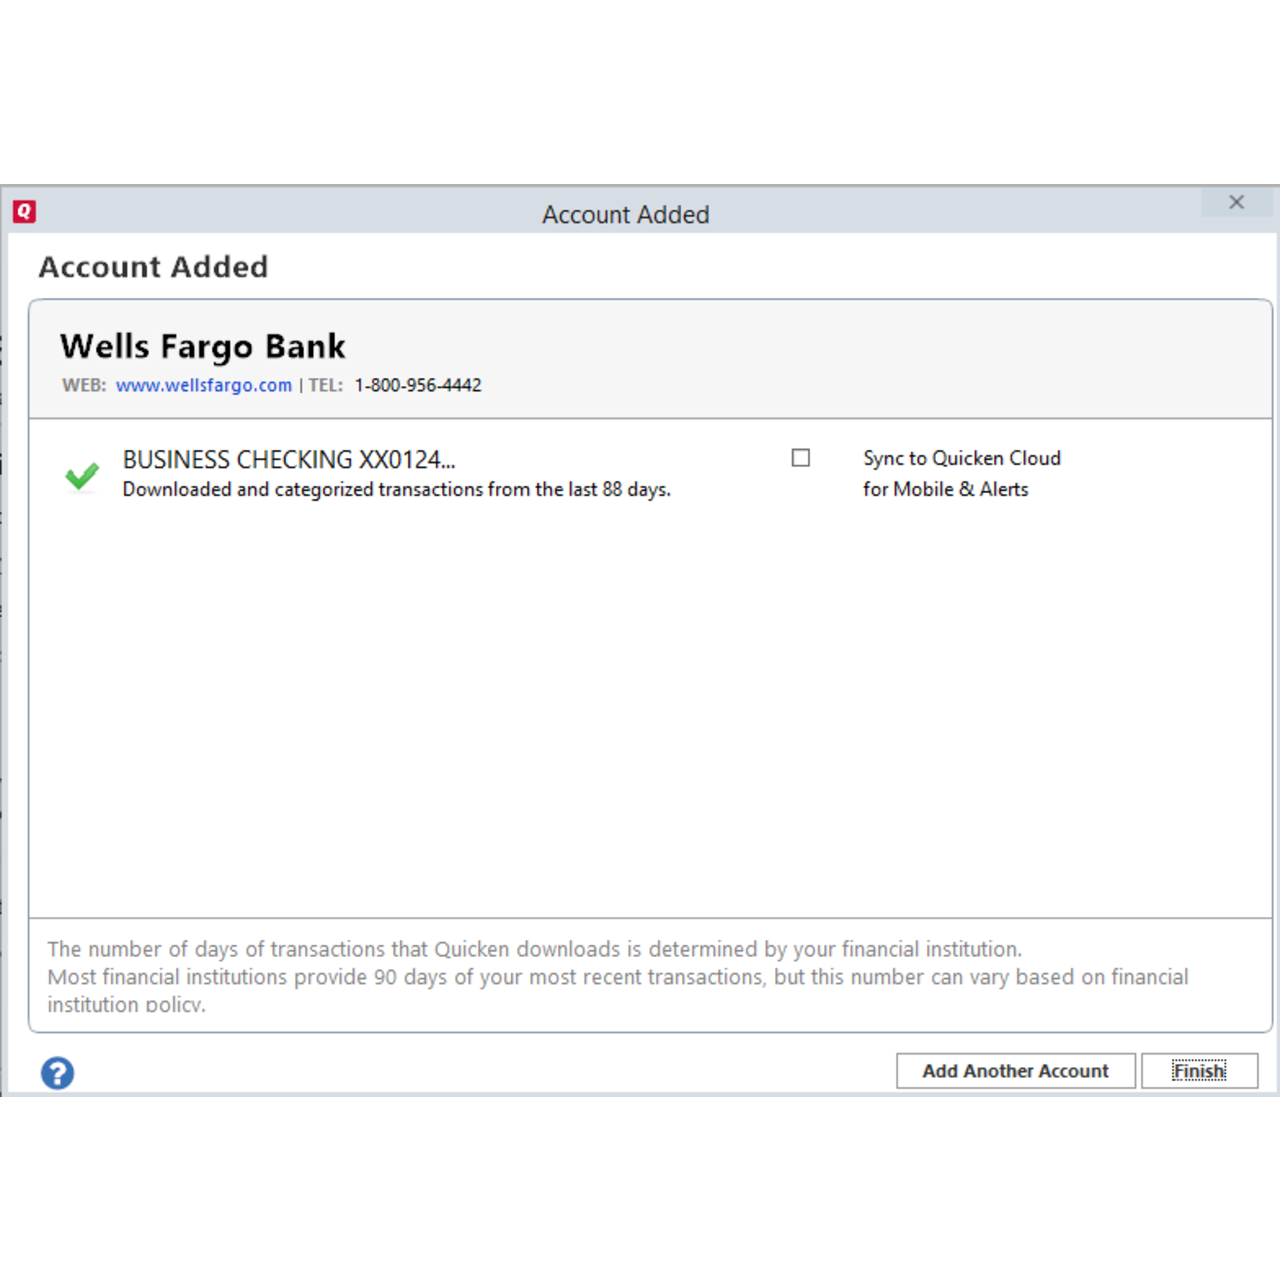 quicken 2017 home and business upgrade